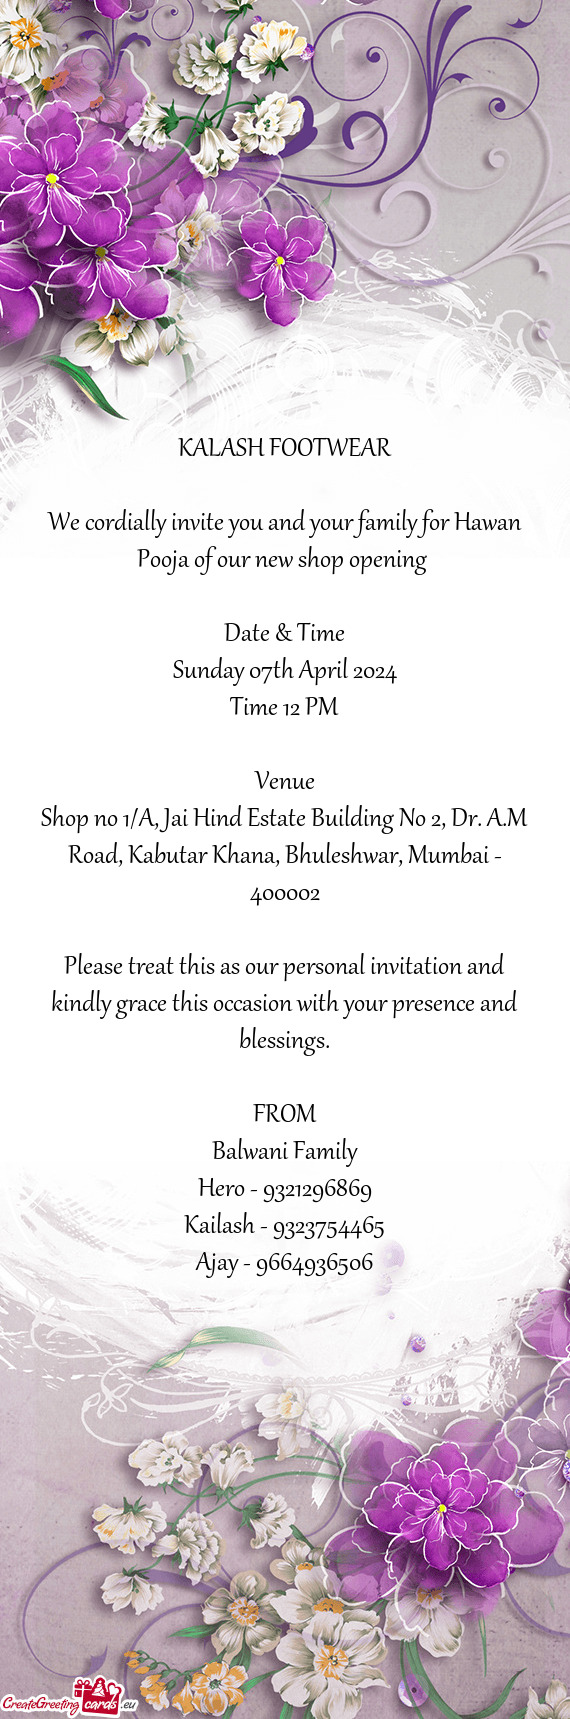 We cordially invite you and your family for Hawan Pooja of our new shop opening